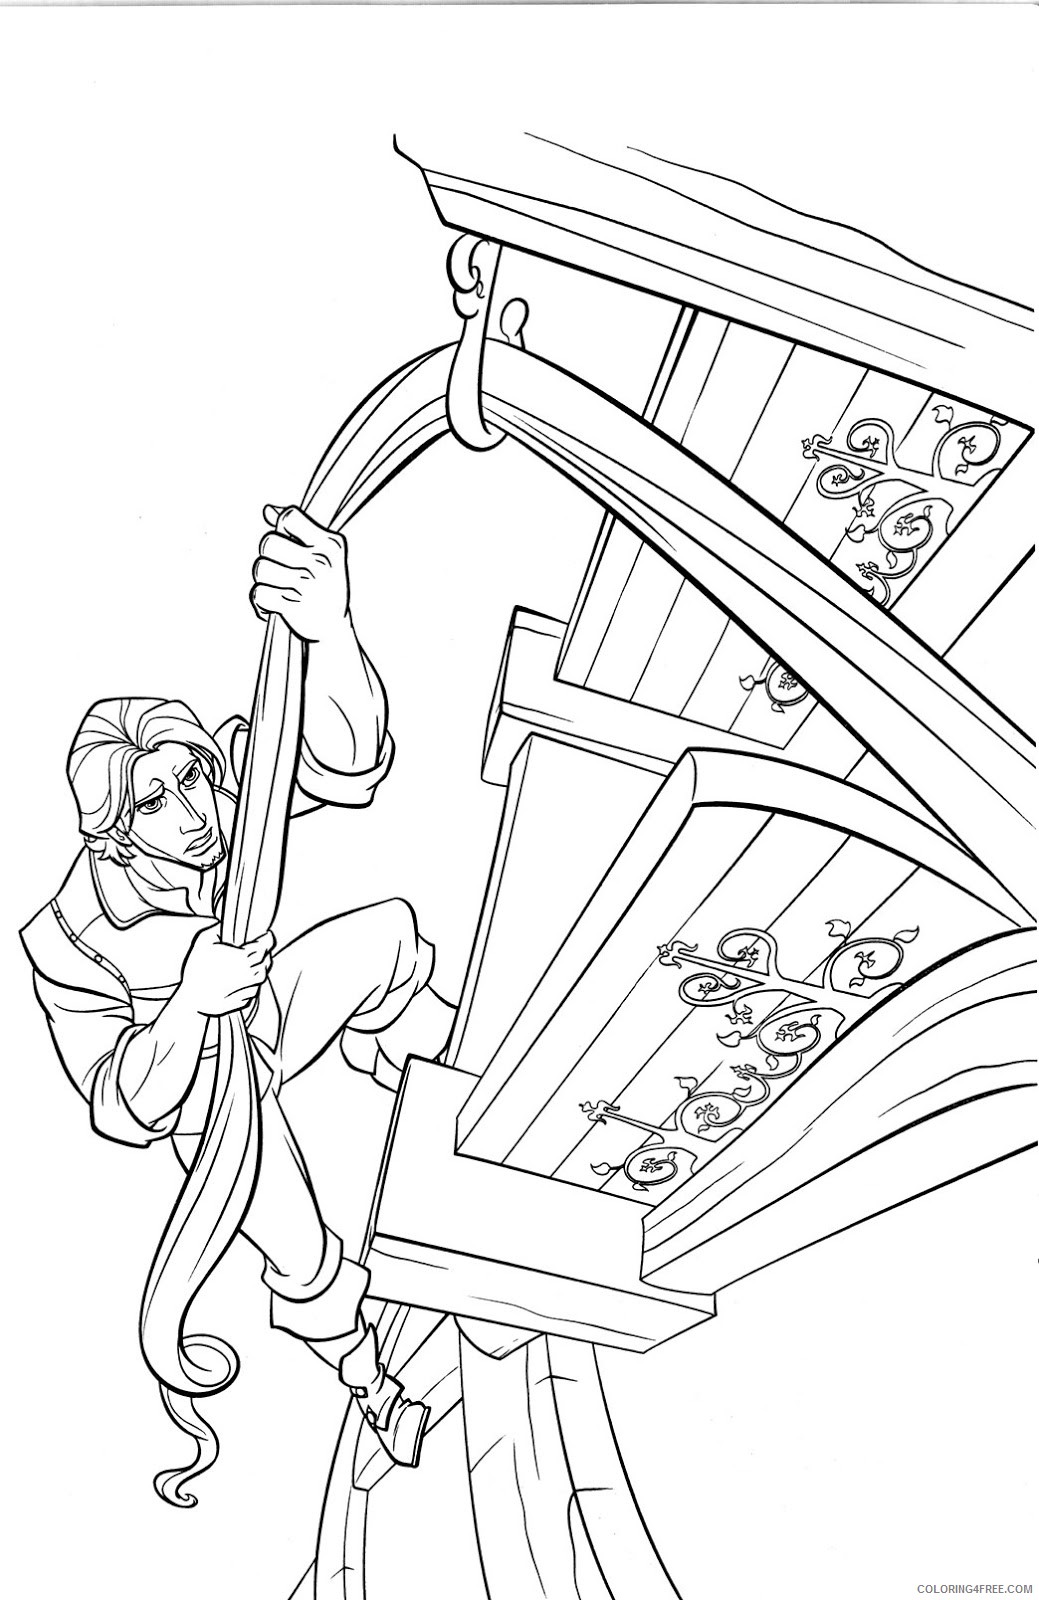 Rapunzel Coloring Pages Cartoons Princess Rapunzel and Flynn Rider Printable 2020 5299 Coloring4free